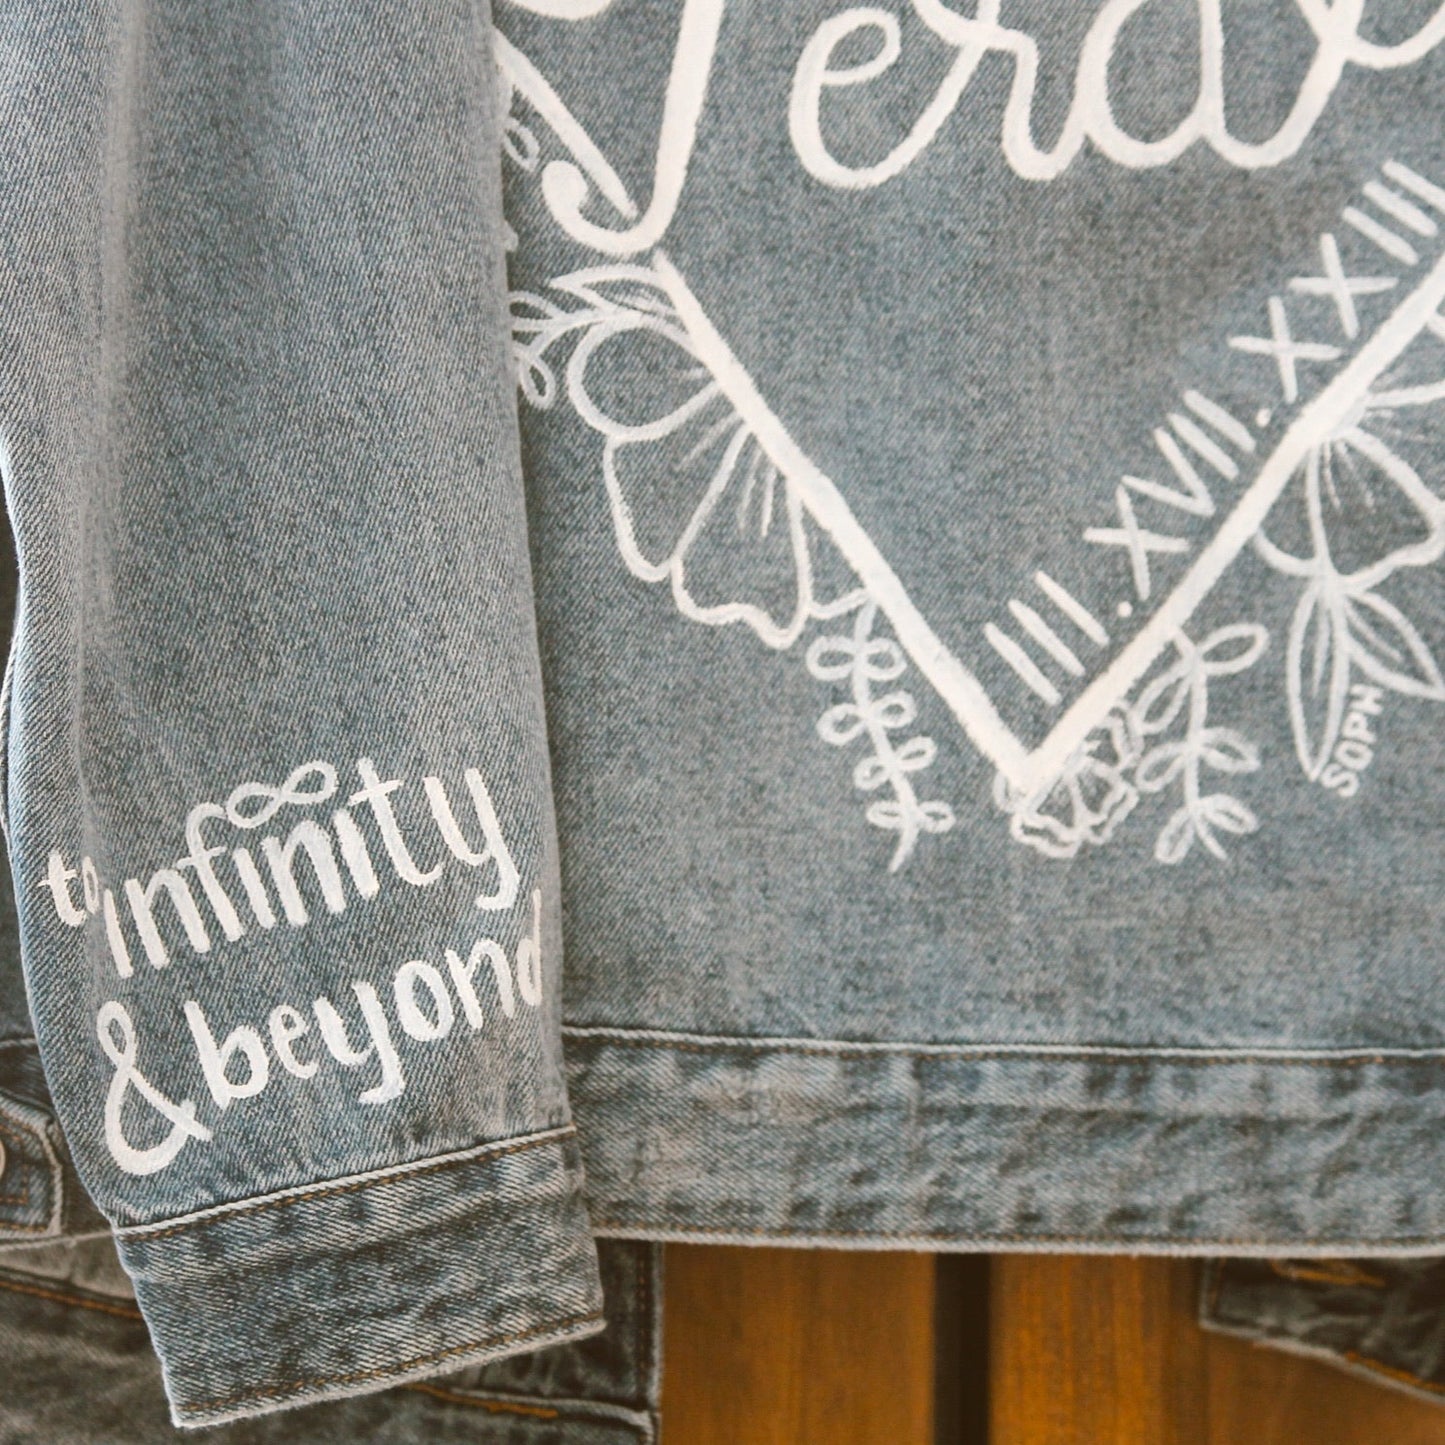 Hand-Painted Bridal Denim Jacket featuring delicate flowers, personalized with initials and love quote. Unique and chic fashion for a memorable wedding day. #BridalStyle #WeddingFashion